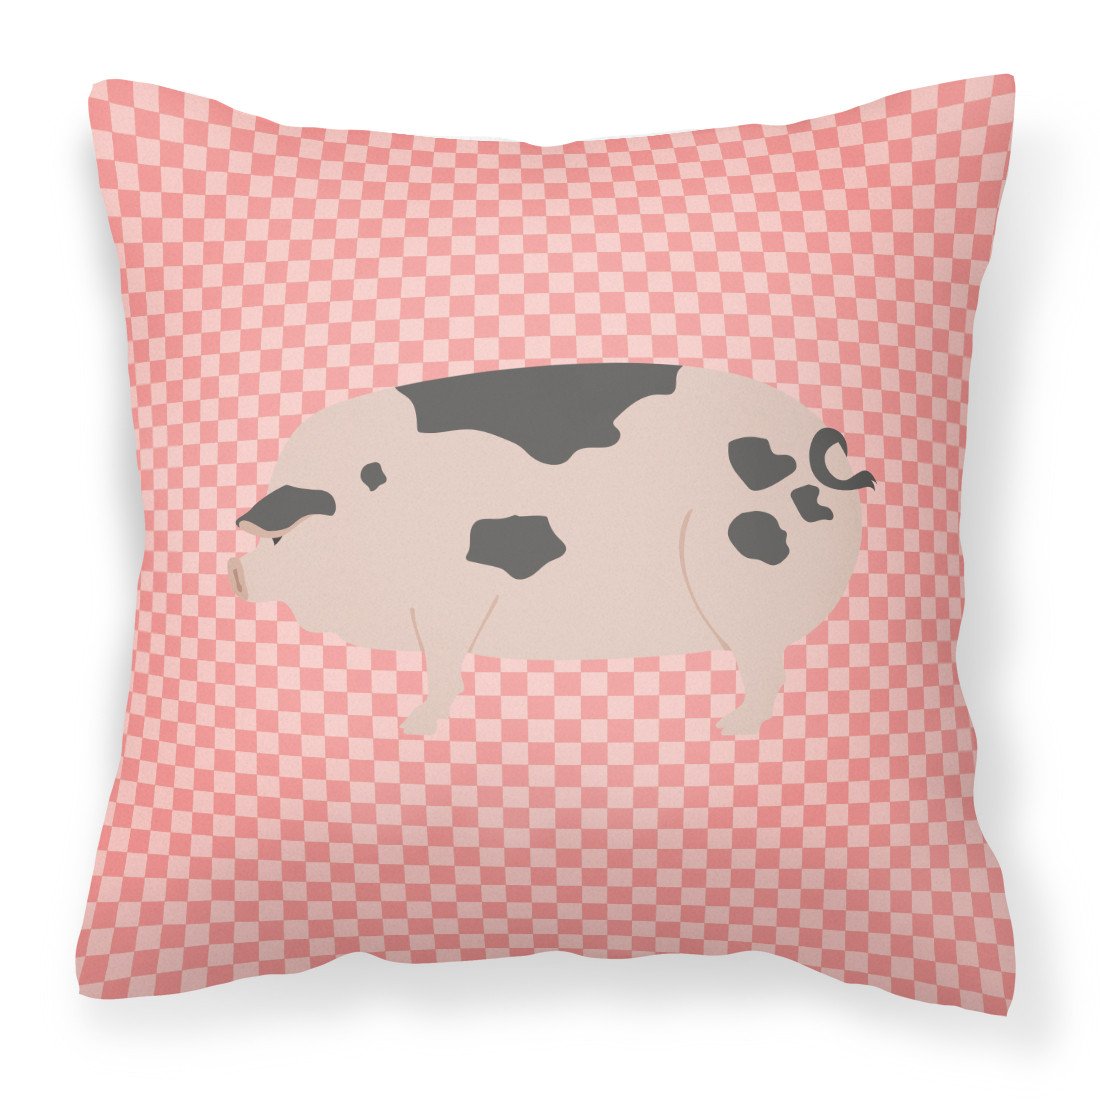 Gloucester Old Spot Pig Pink Check Fabric Decorative Pillow BB7940PW1818 by Caroline's Treasures